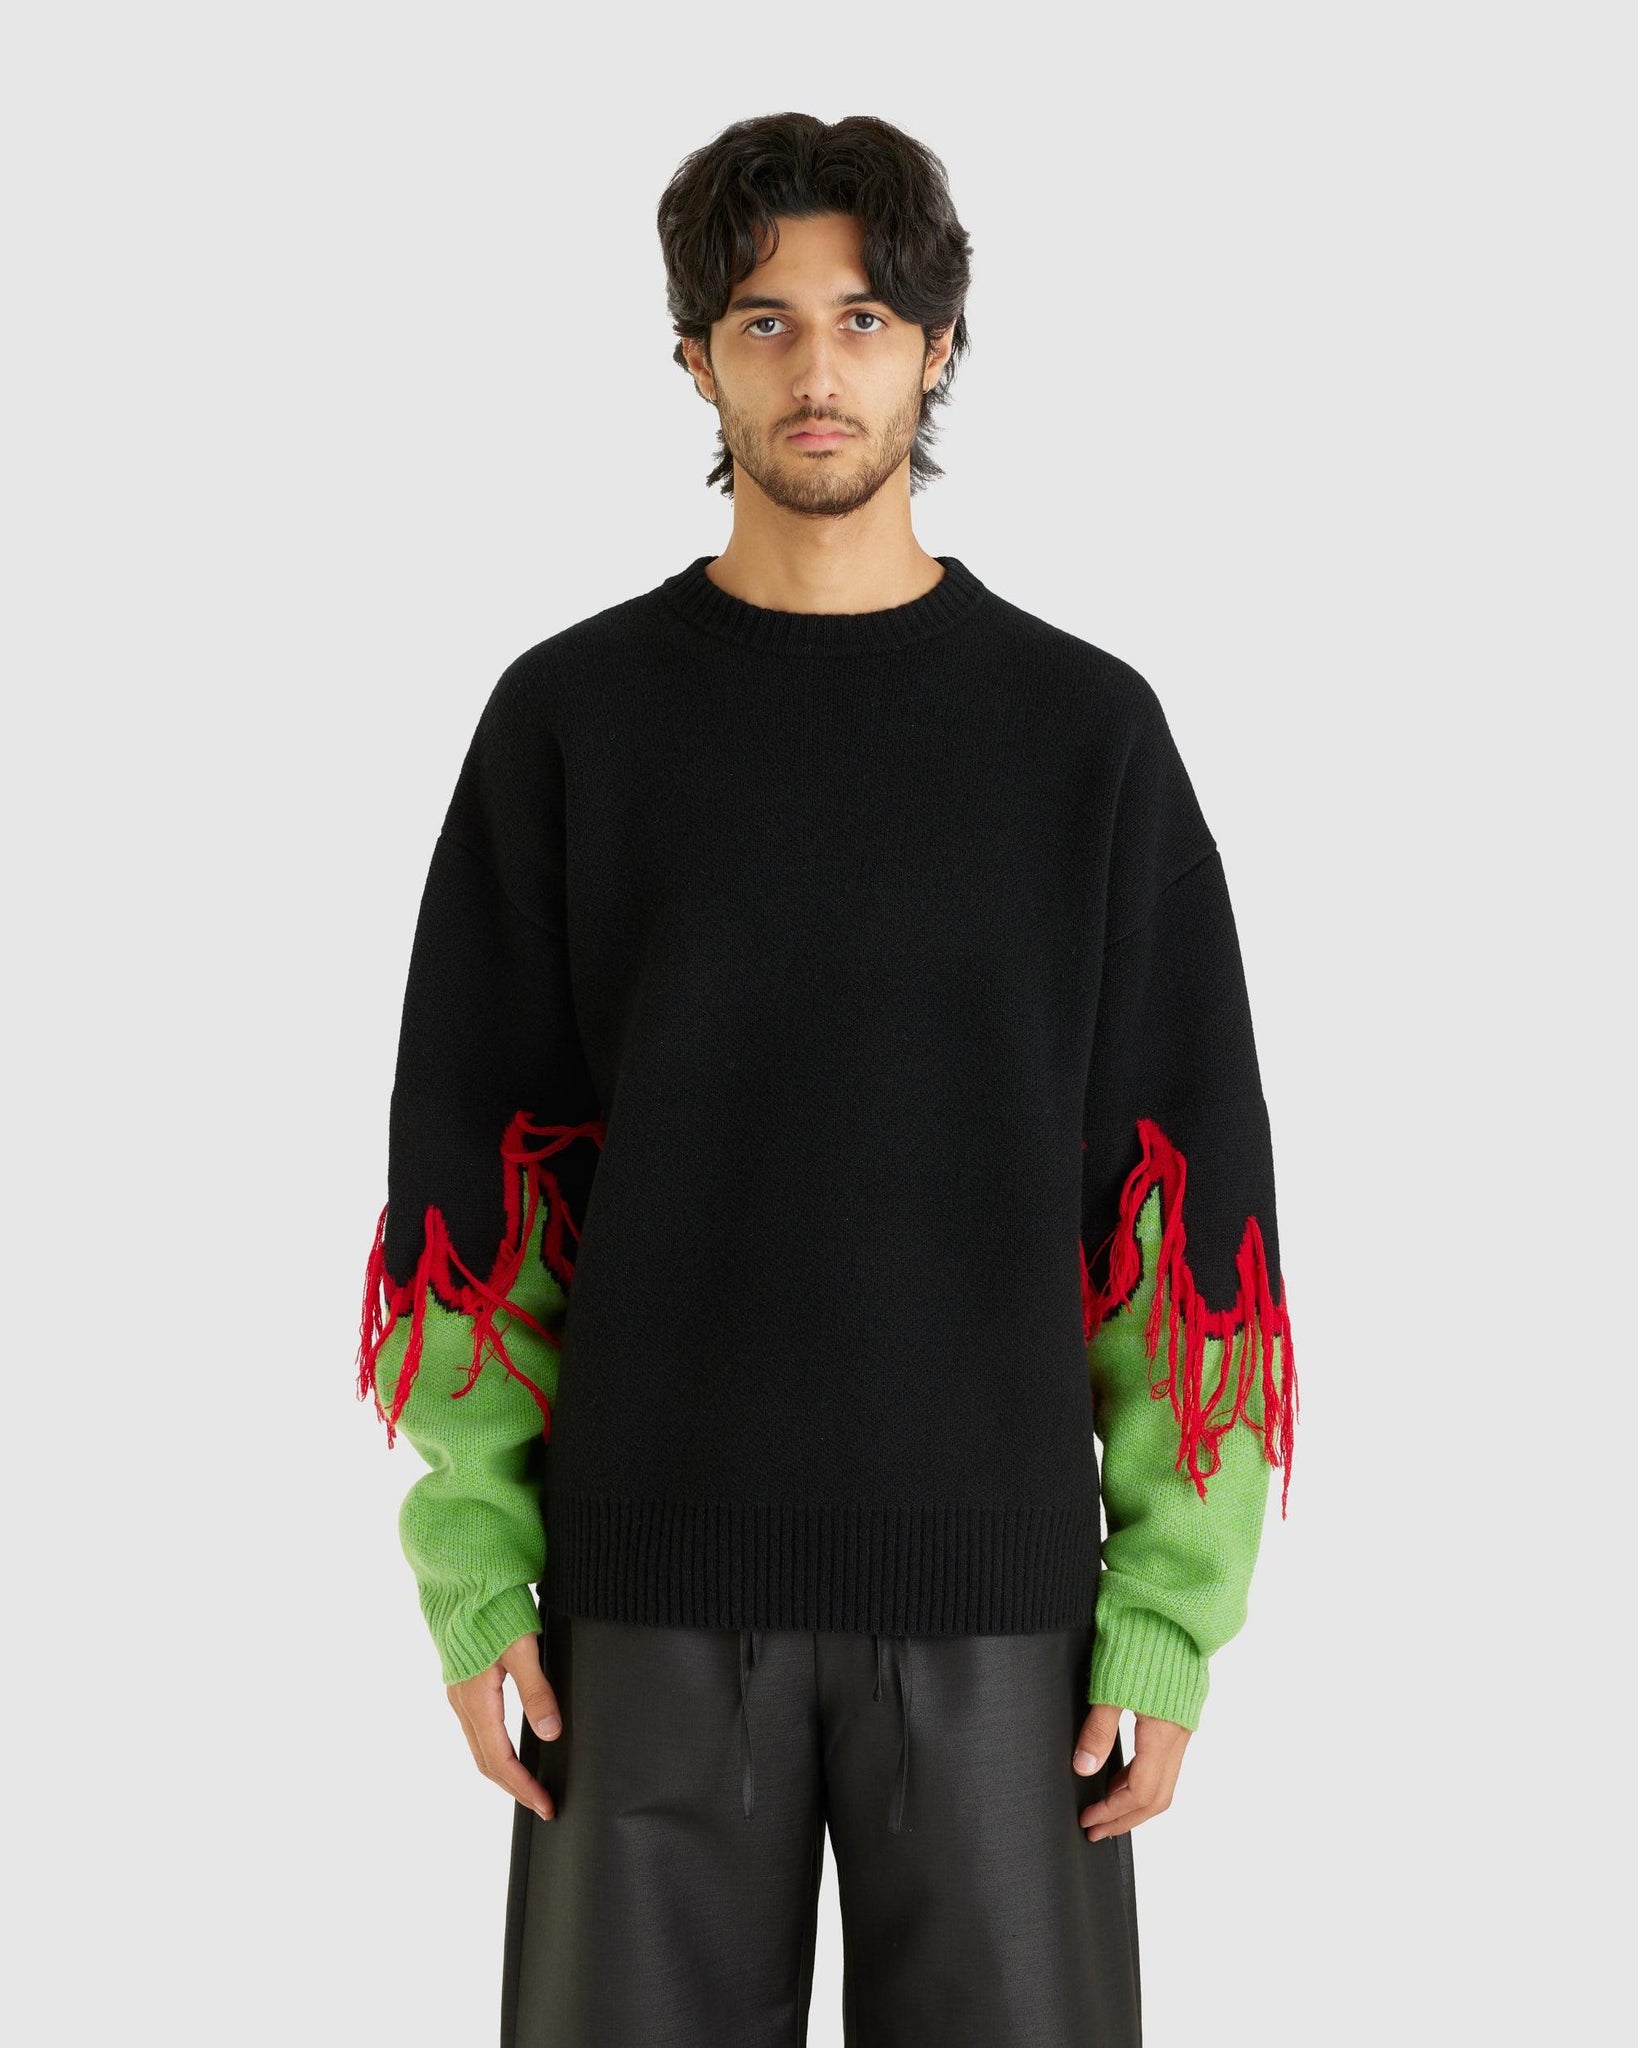 Flame Sweater - {{ collection.title }} - Chinatown Country Club 